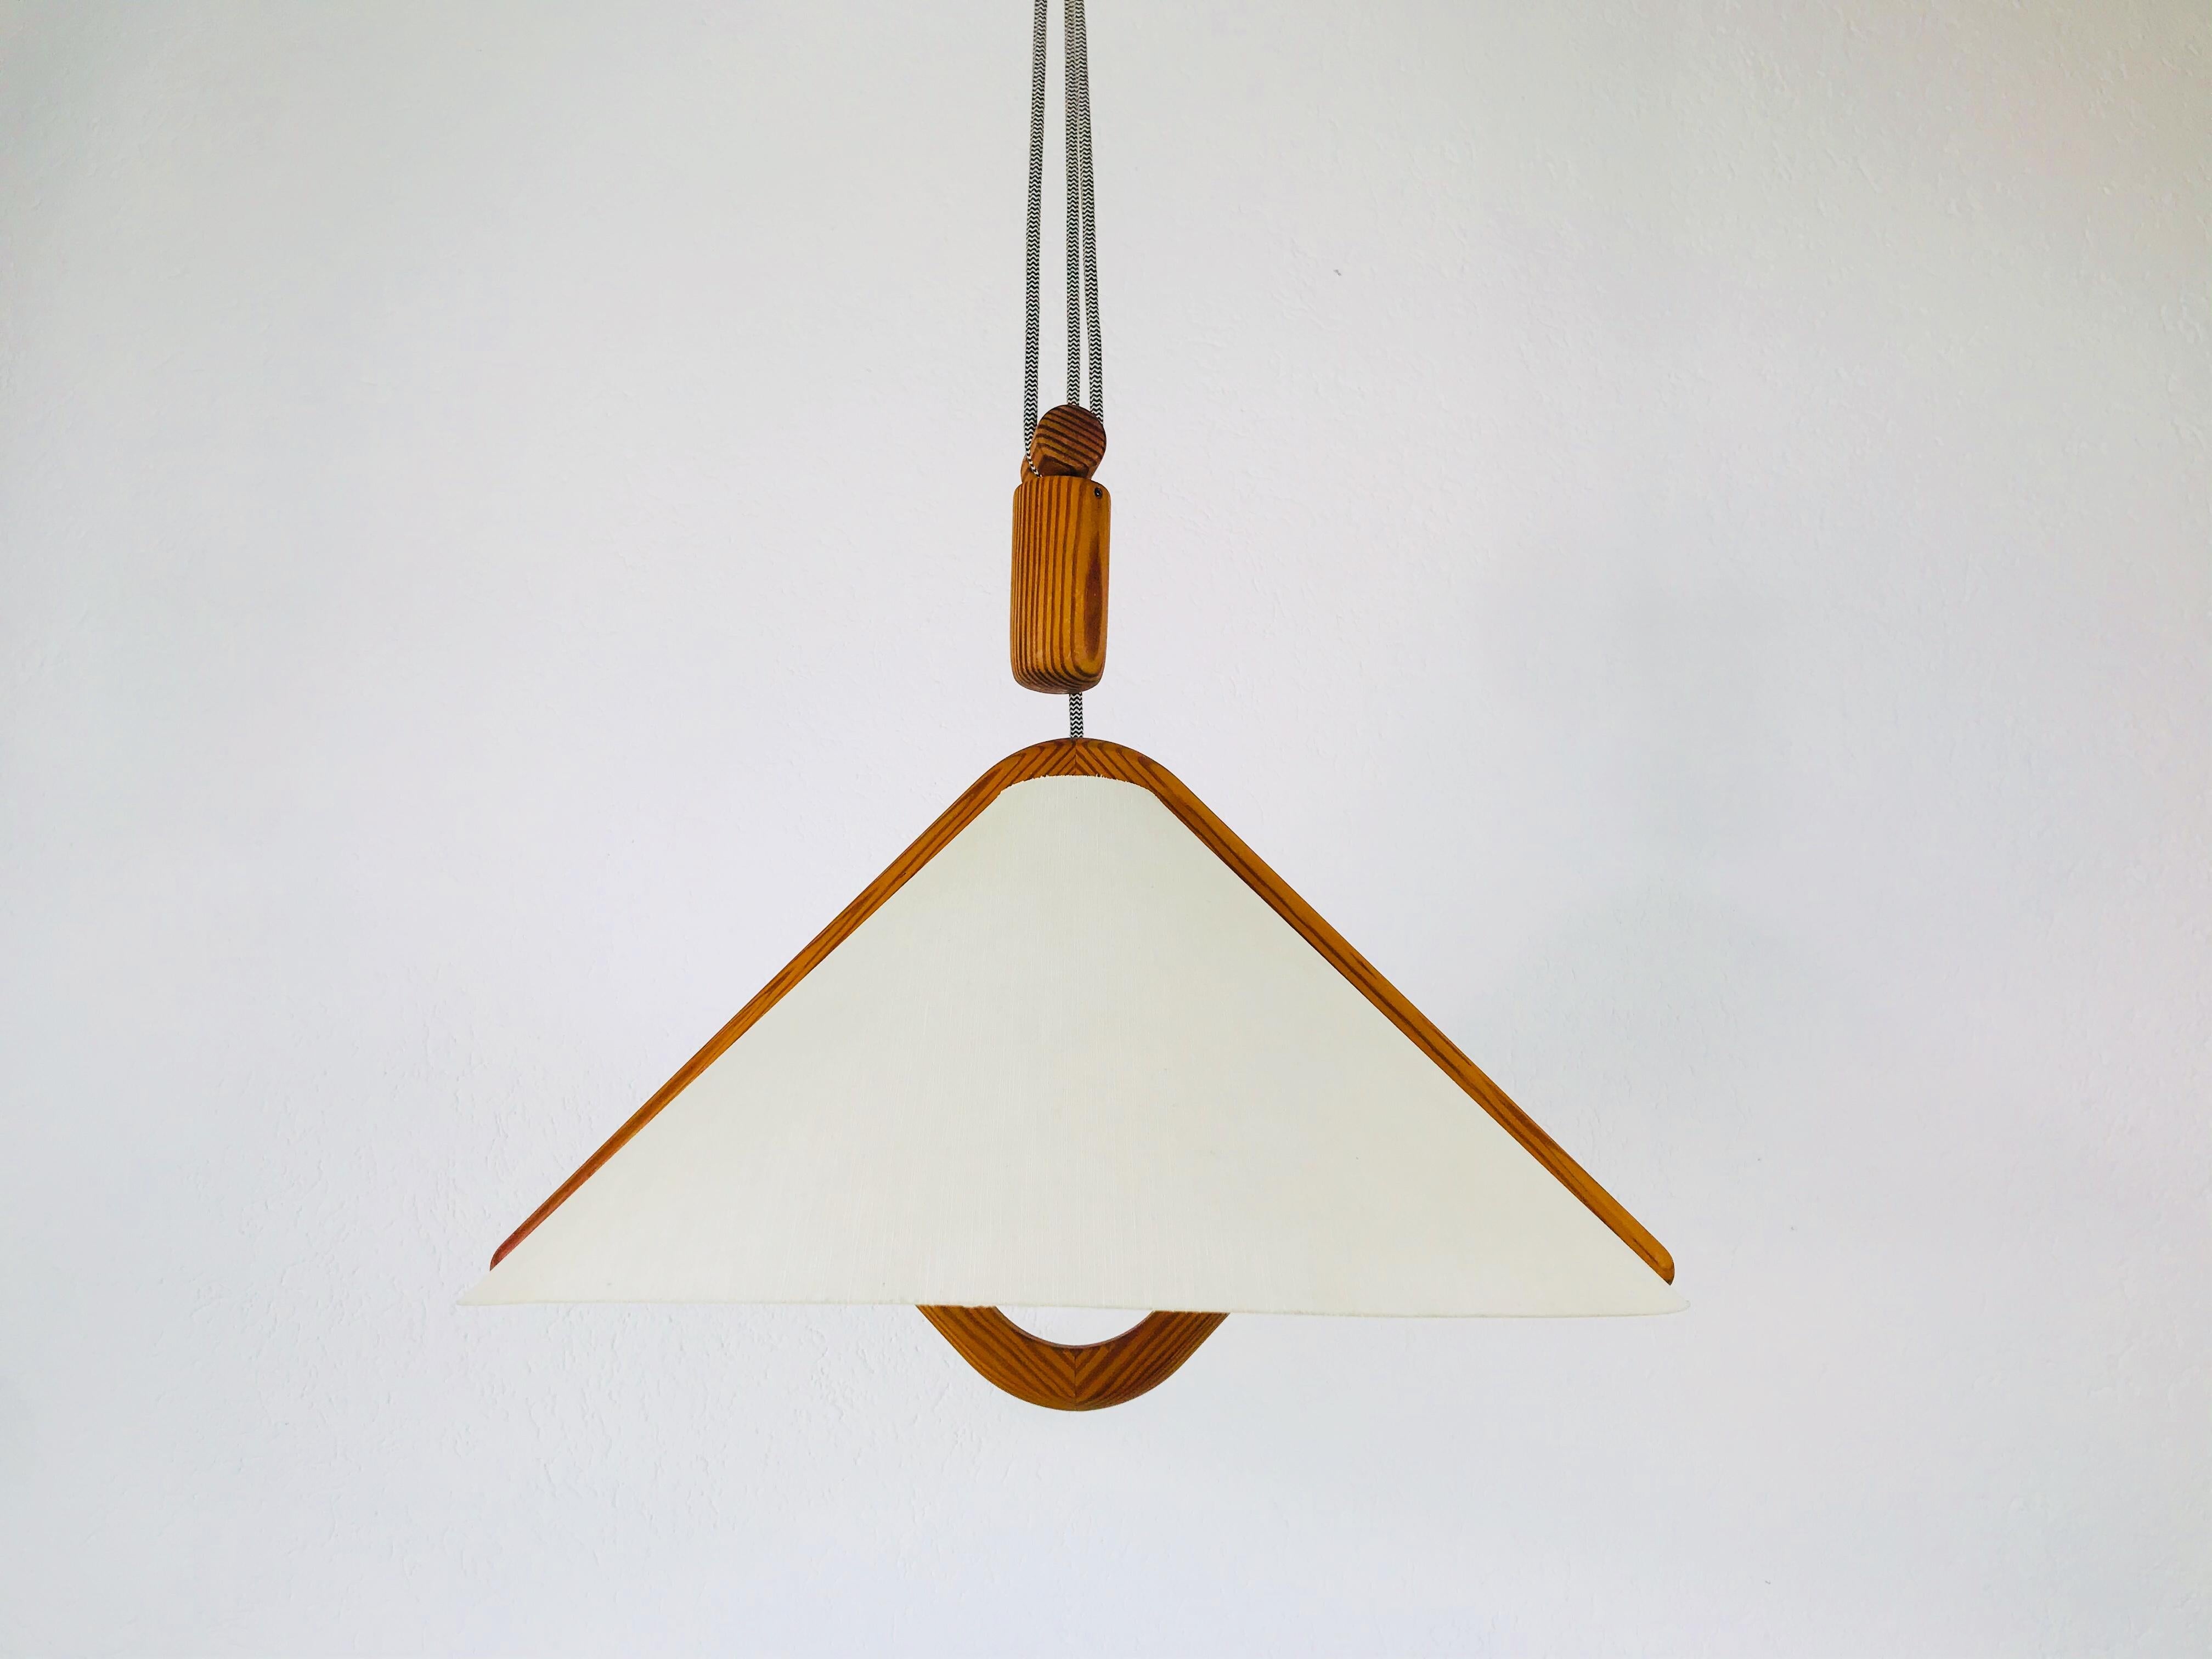 German Adjustable Midcentury Wooden Pendant Lamp with Counterweight by Domus, 1960s